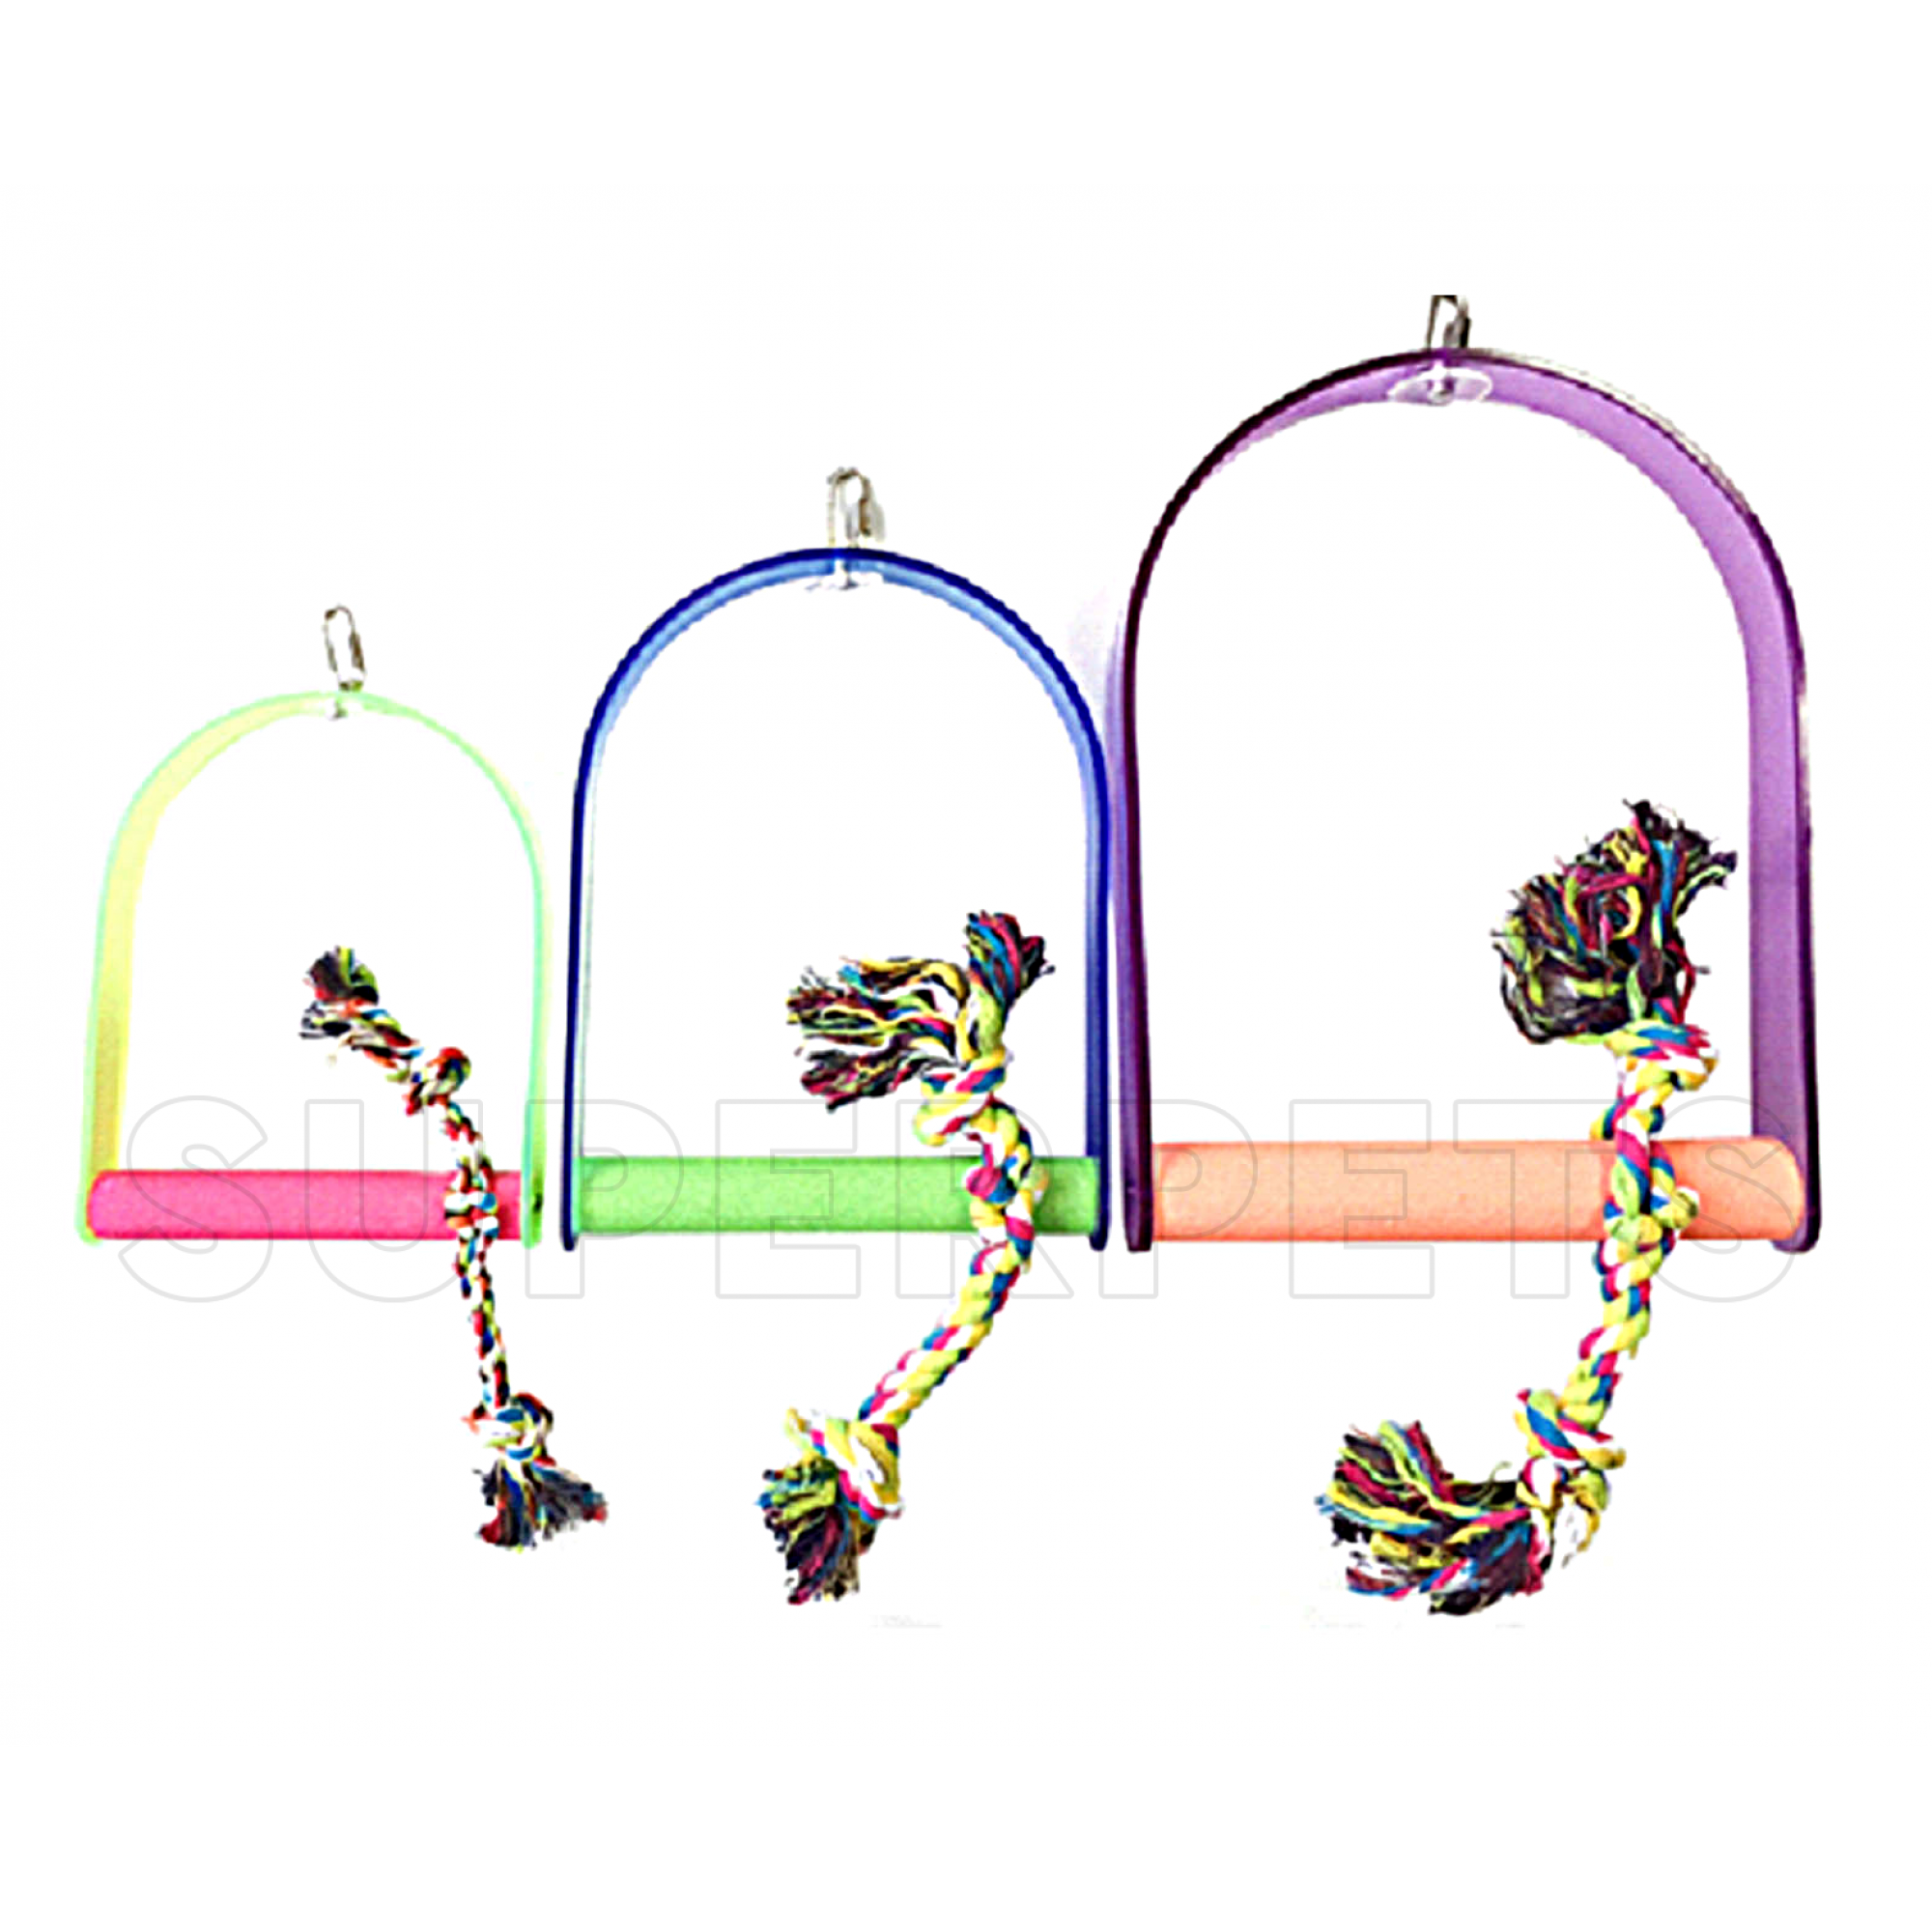 OPSP - 7909 - Acrylic Swing with Wooden Perch